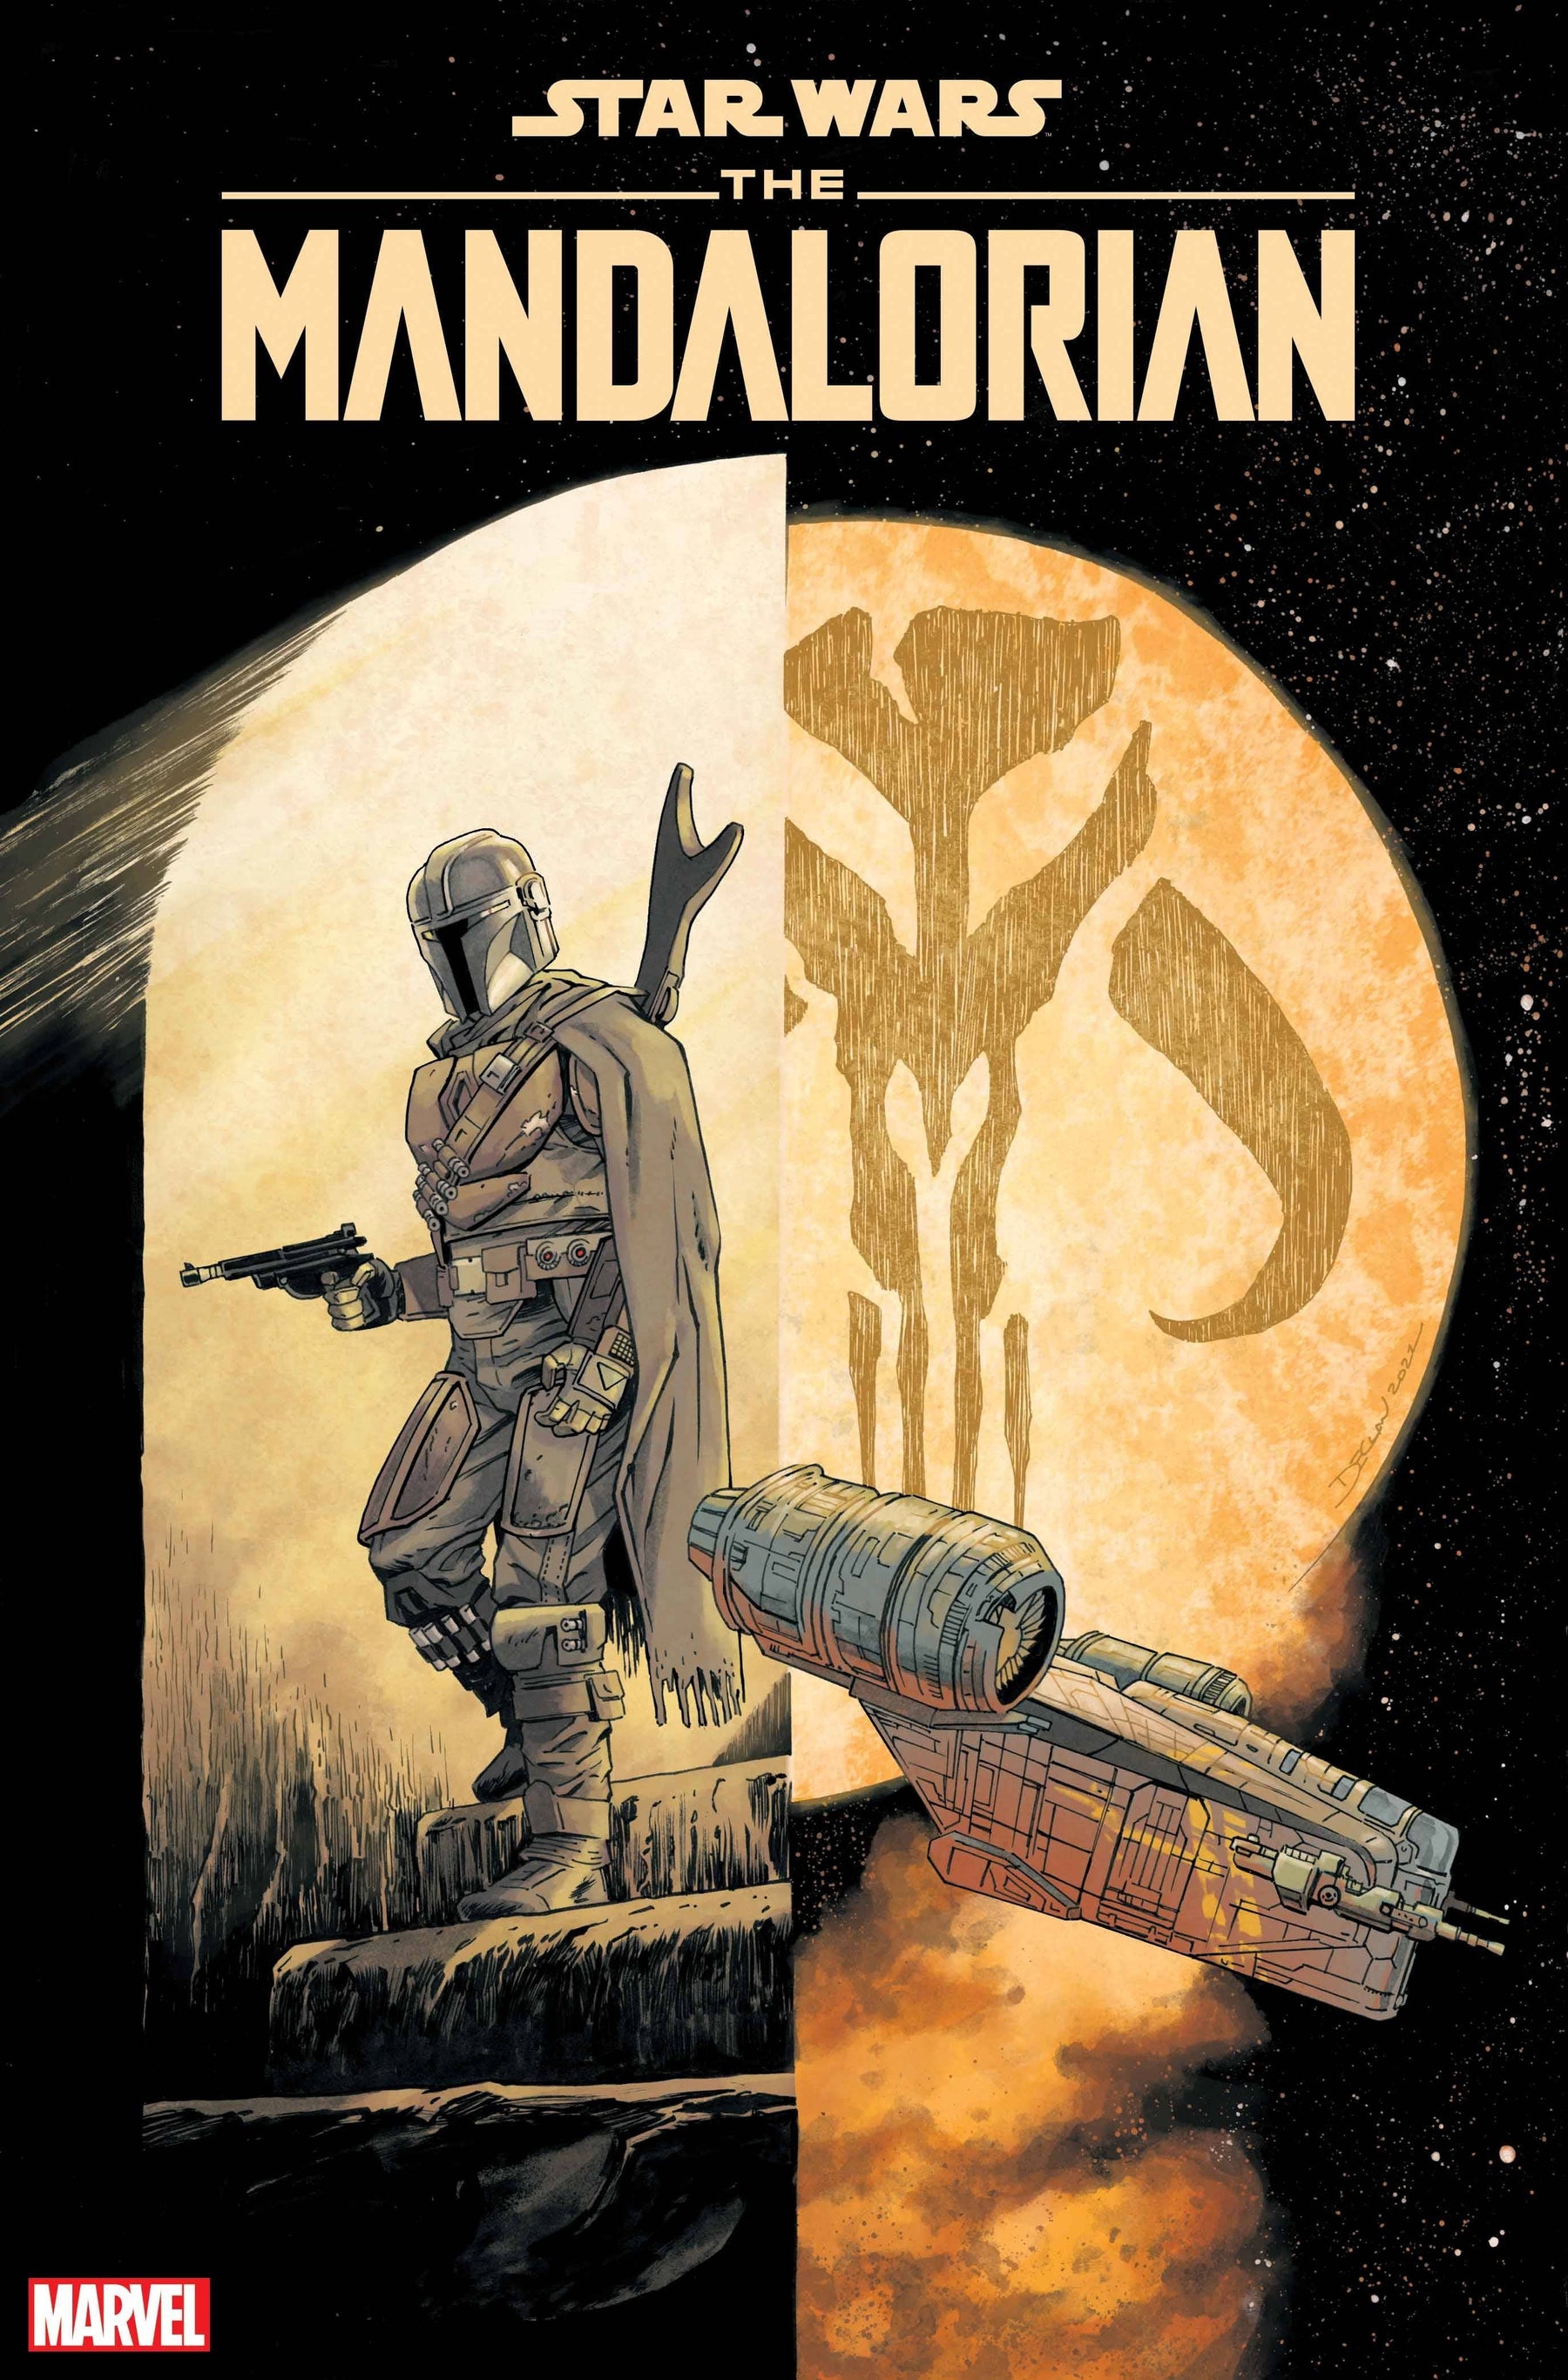 STAR WARS: THE MANDALORIAN #1 SHALVEY COVER SIGNED BY RODNEY BARNES